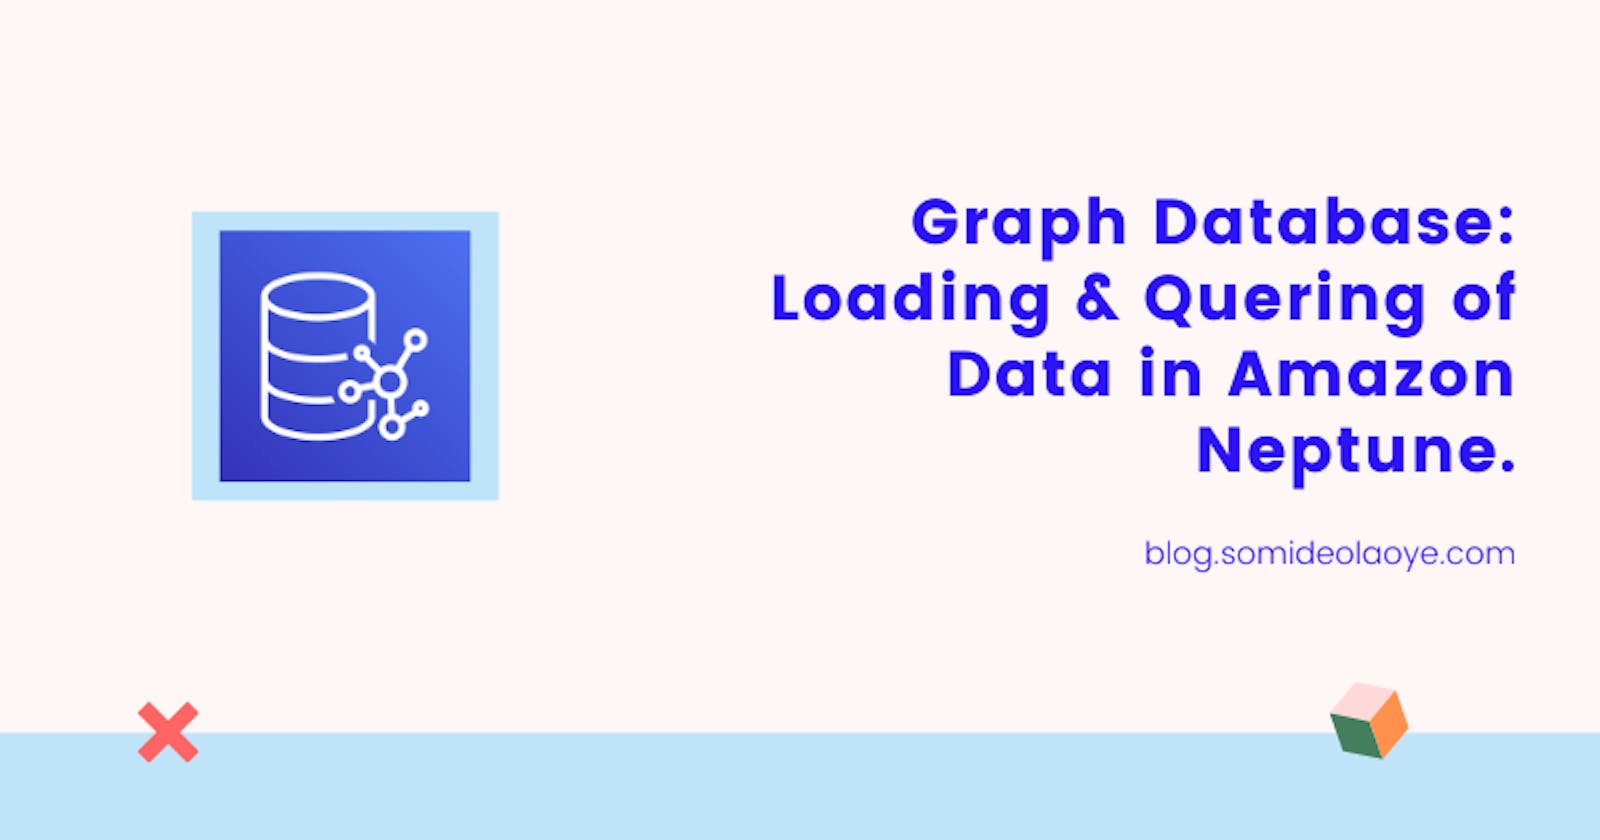 Graph Database: Loading & Quering of Data in Amazon Neptune.